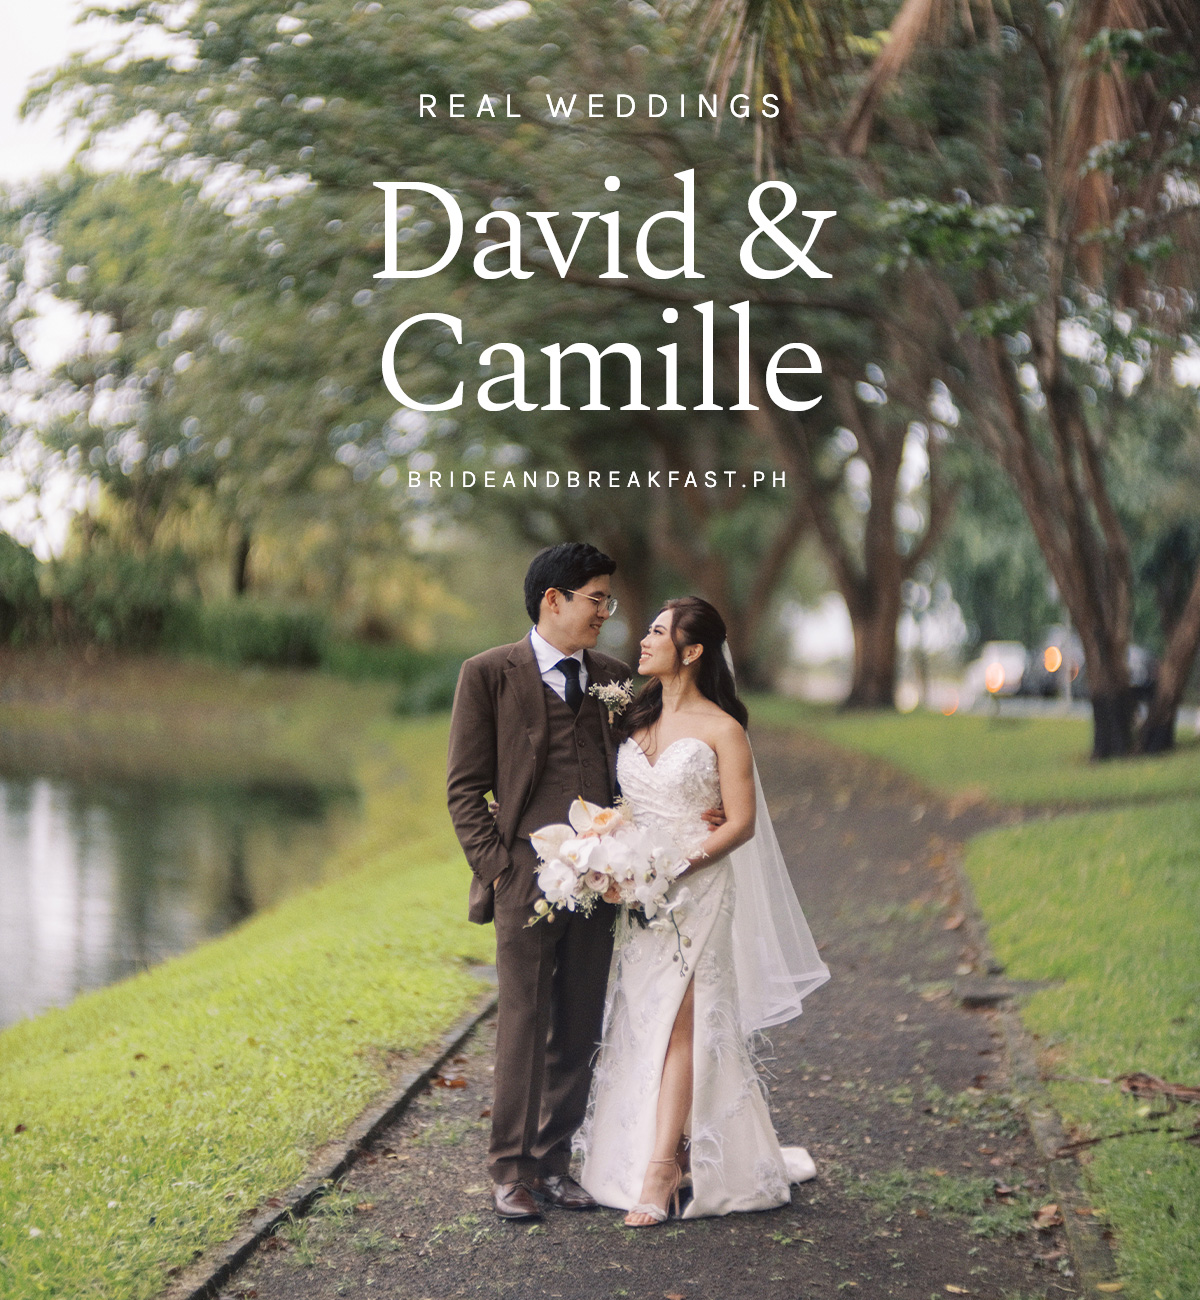 David and Camille